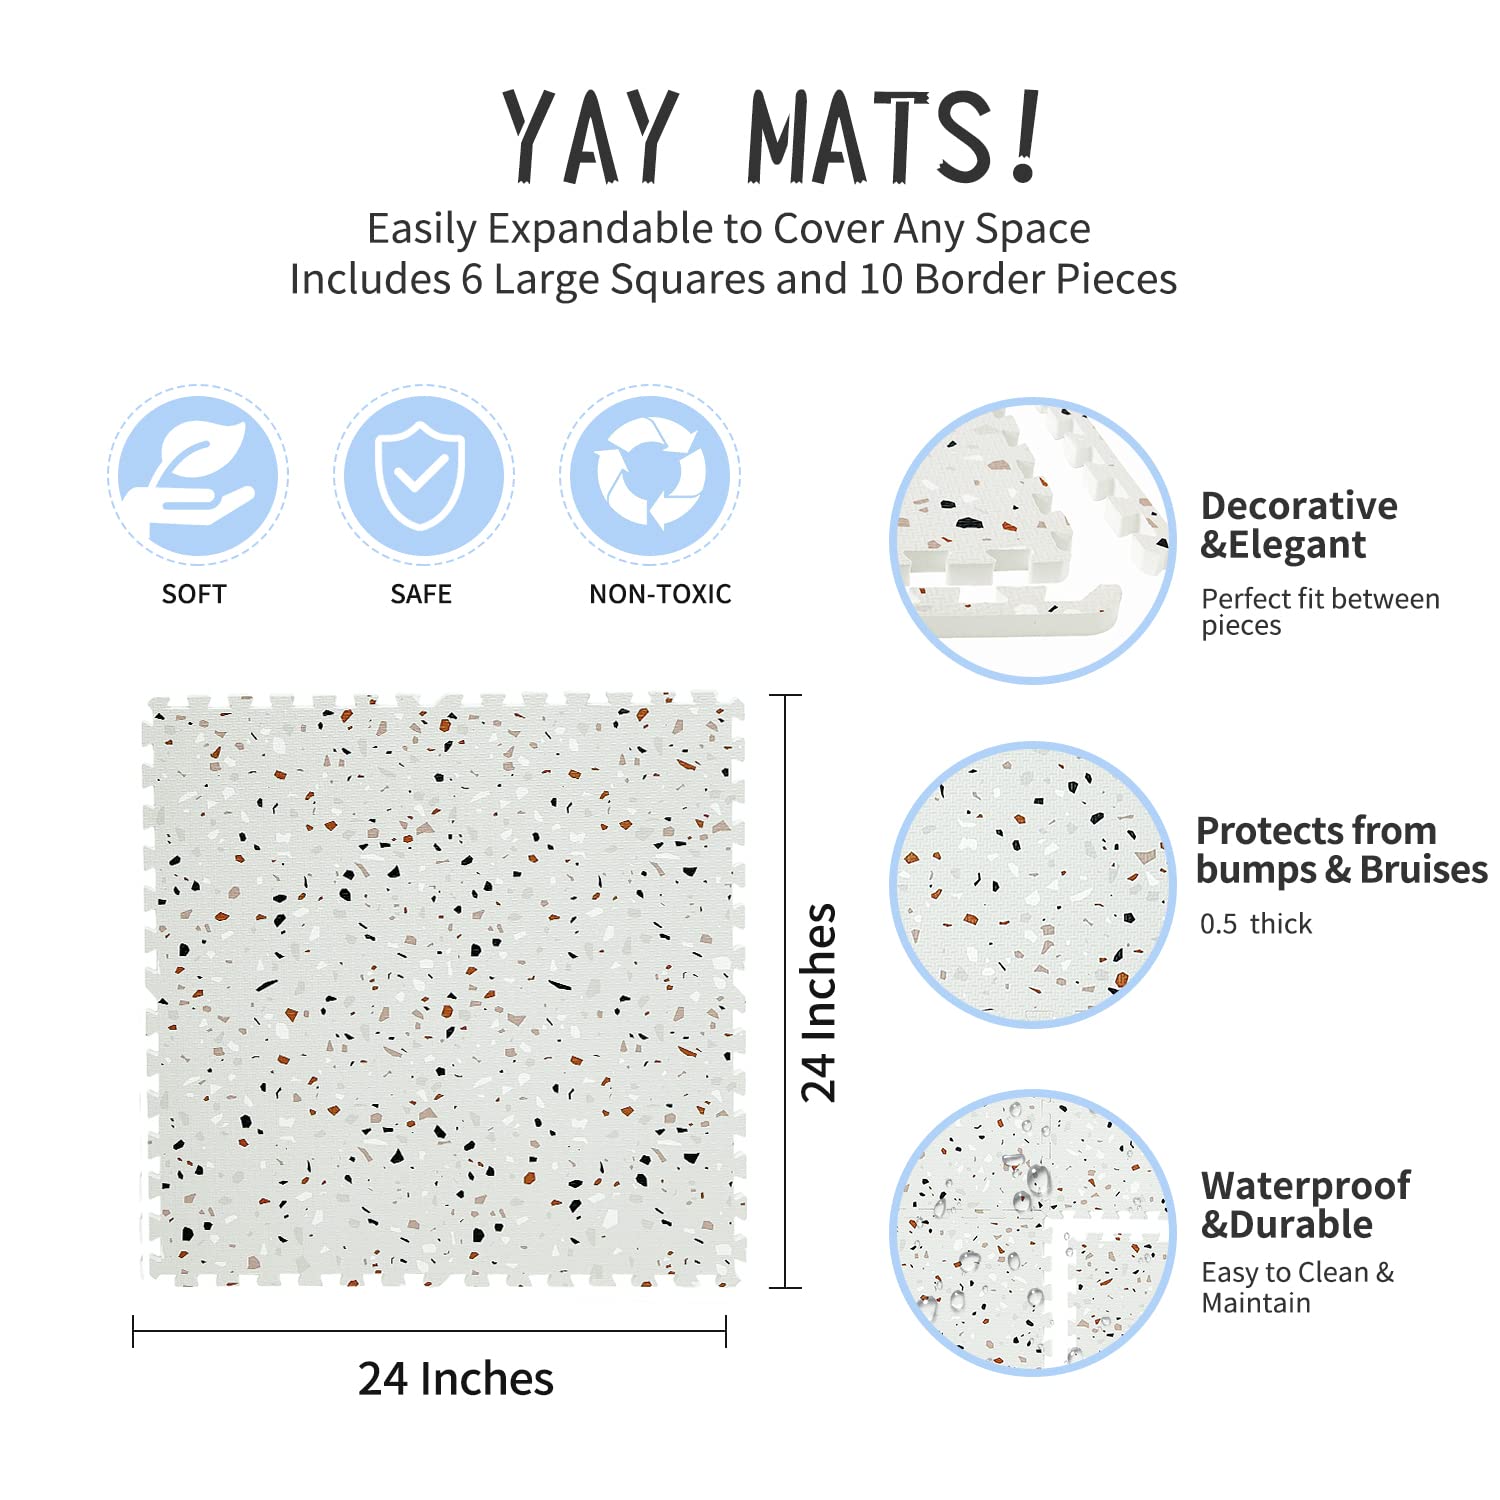 Yay Mats Stylish Extra Large Baby Play Mat. Soft, Thick, Non-Toxic Foam Covers 6 ft x 4 ft. Expandable Tiles with Edges Infants and Kids Playmat Tummy Time Mat